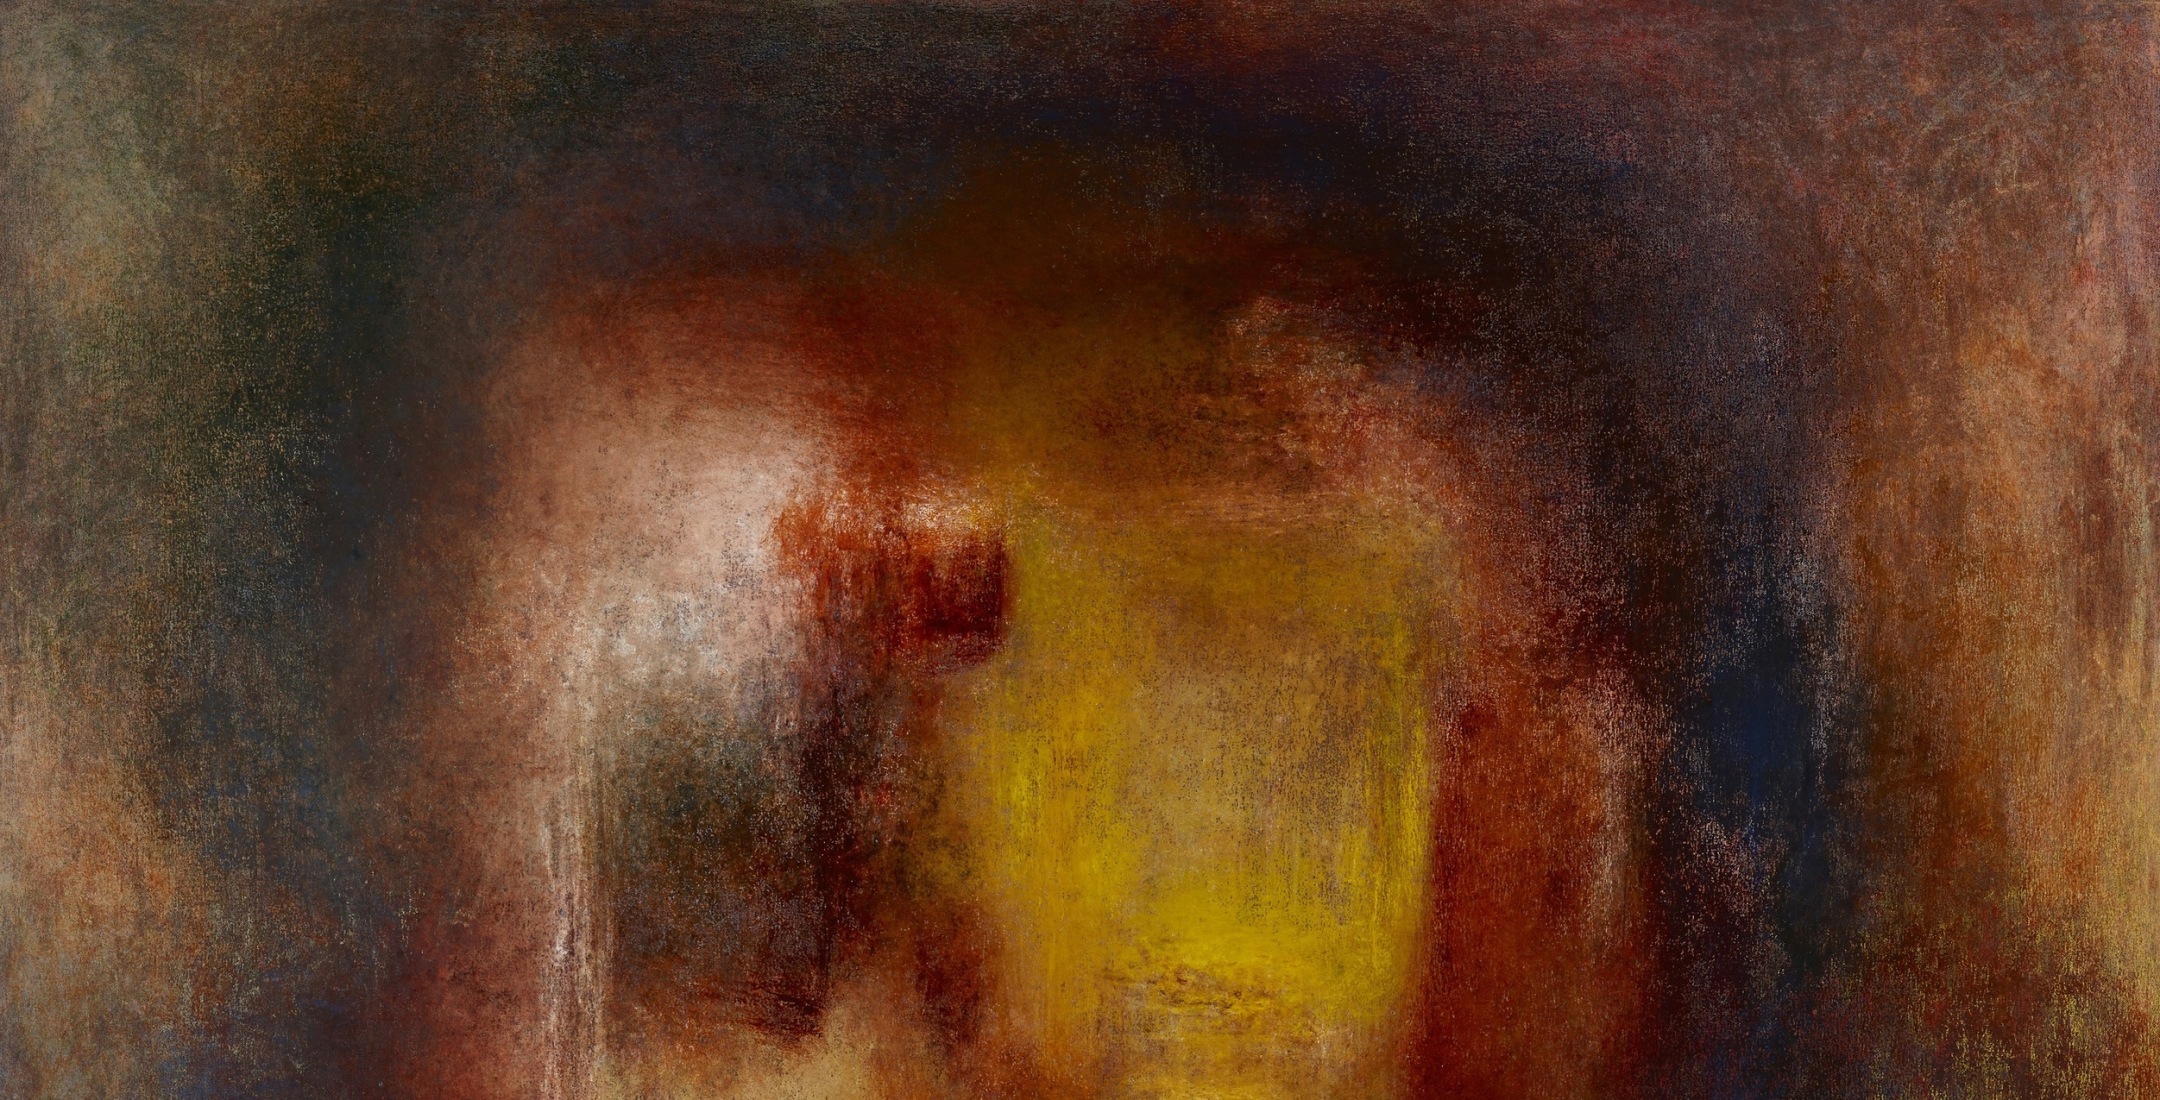 Image of Rebecca Purdum's abstract painting Decade in yellow, crimson, browns and cream.